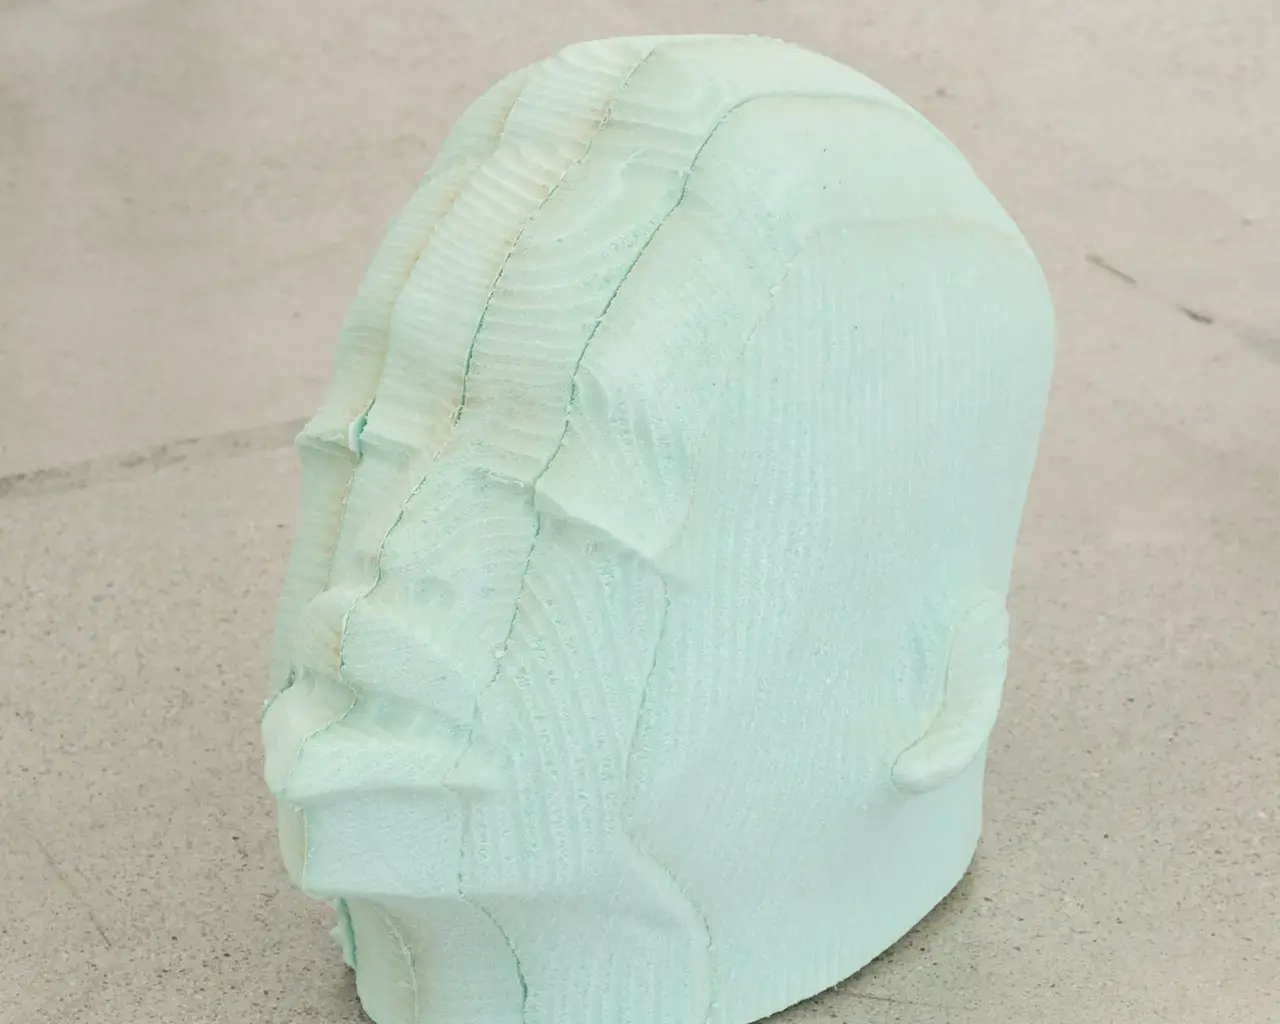 Matthew Angelo Harrison, "Head 1.003 (Post-Chronology Series)," 2016, open-cell polyurethane foam, 22 x 22 x 17 inches. Photo courtesy of the Institute of Contemporary Art.